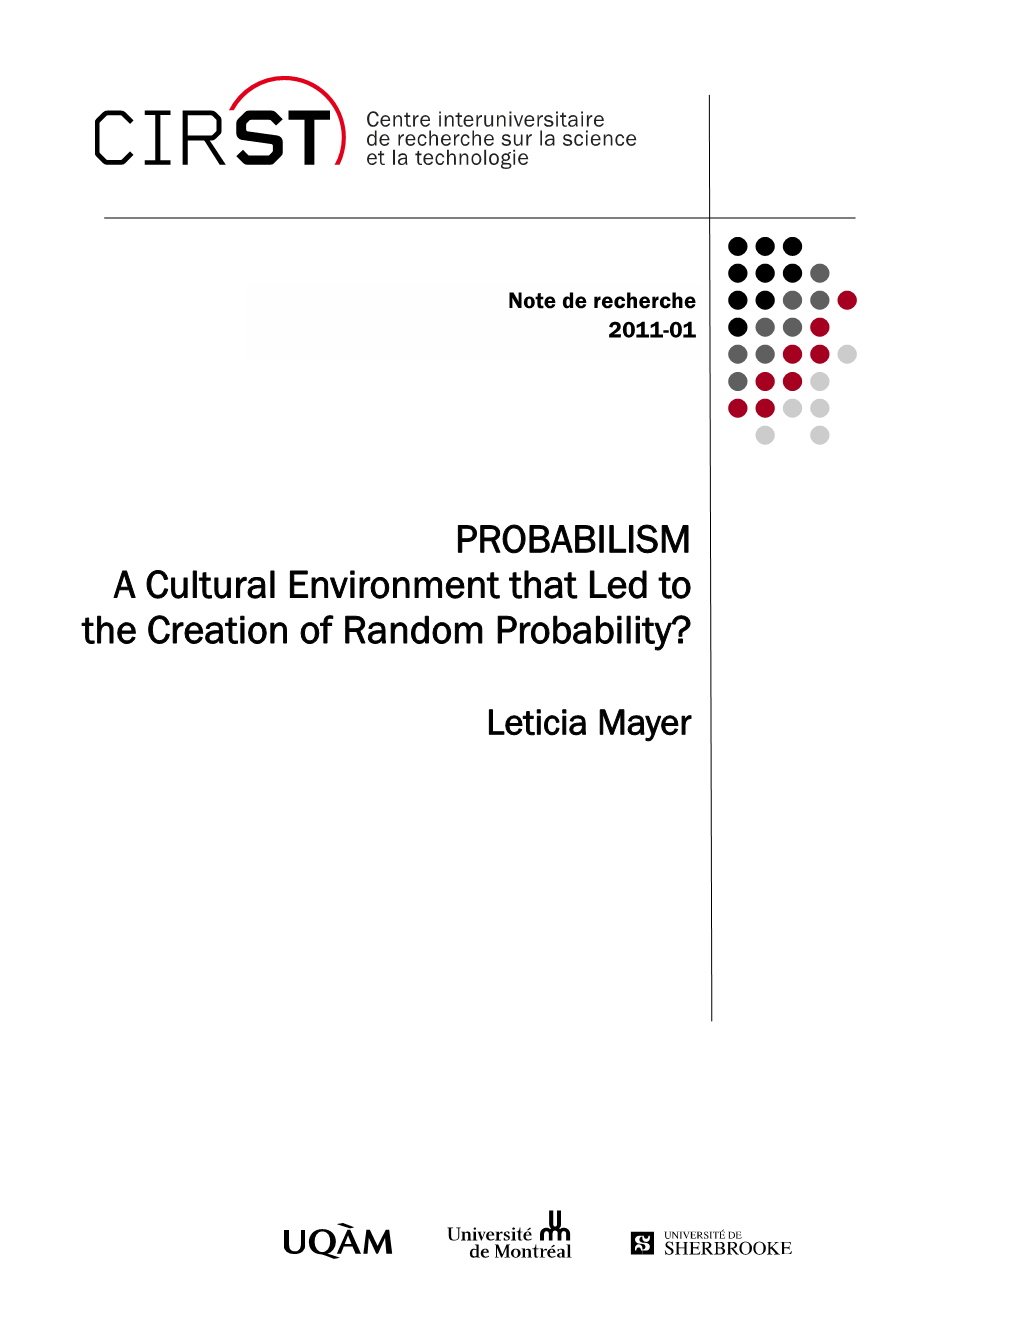 PROBABILISM a Cultural Environment That Led to the Creation of Random Probability?